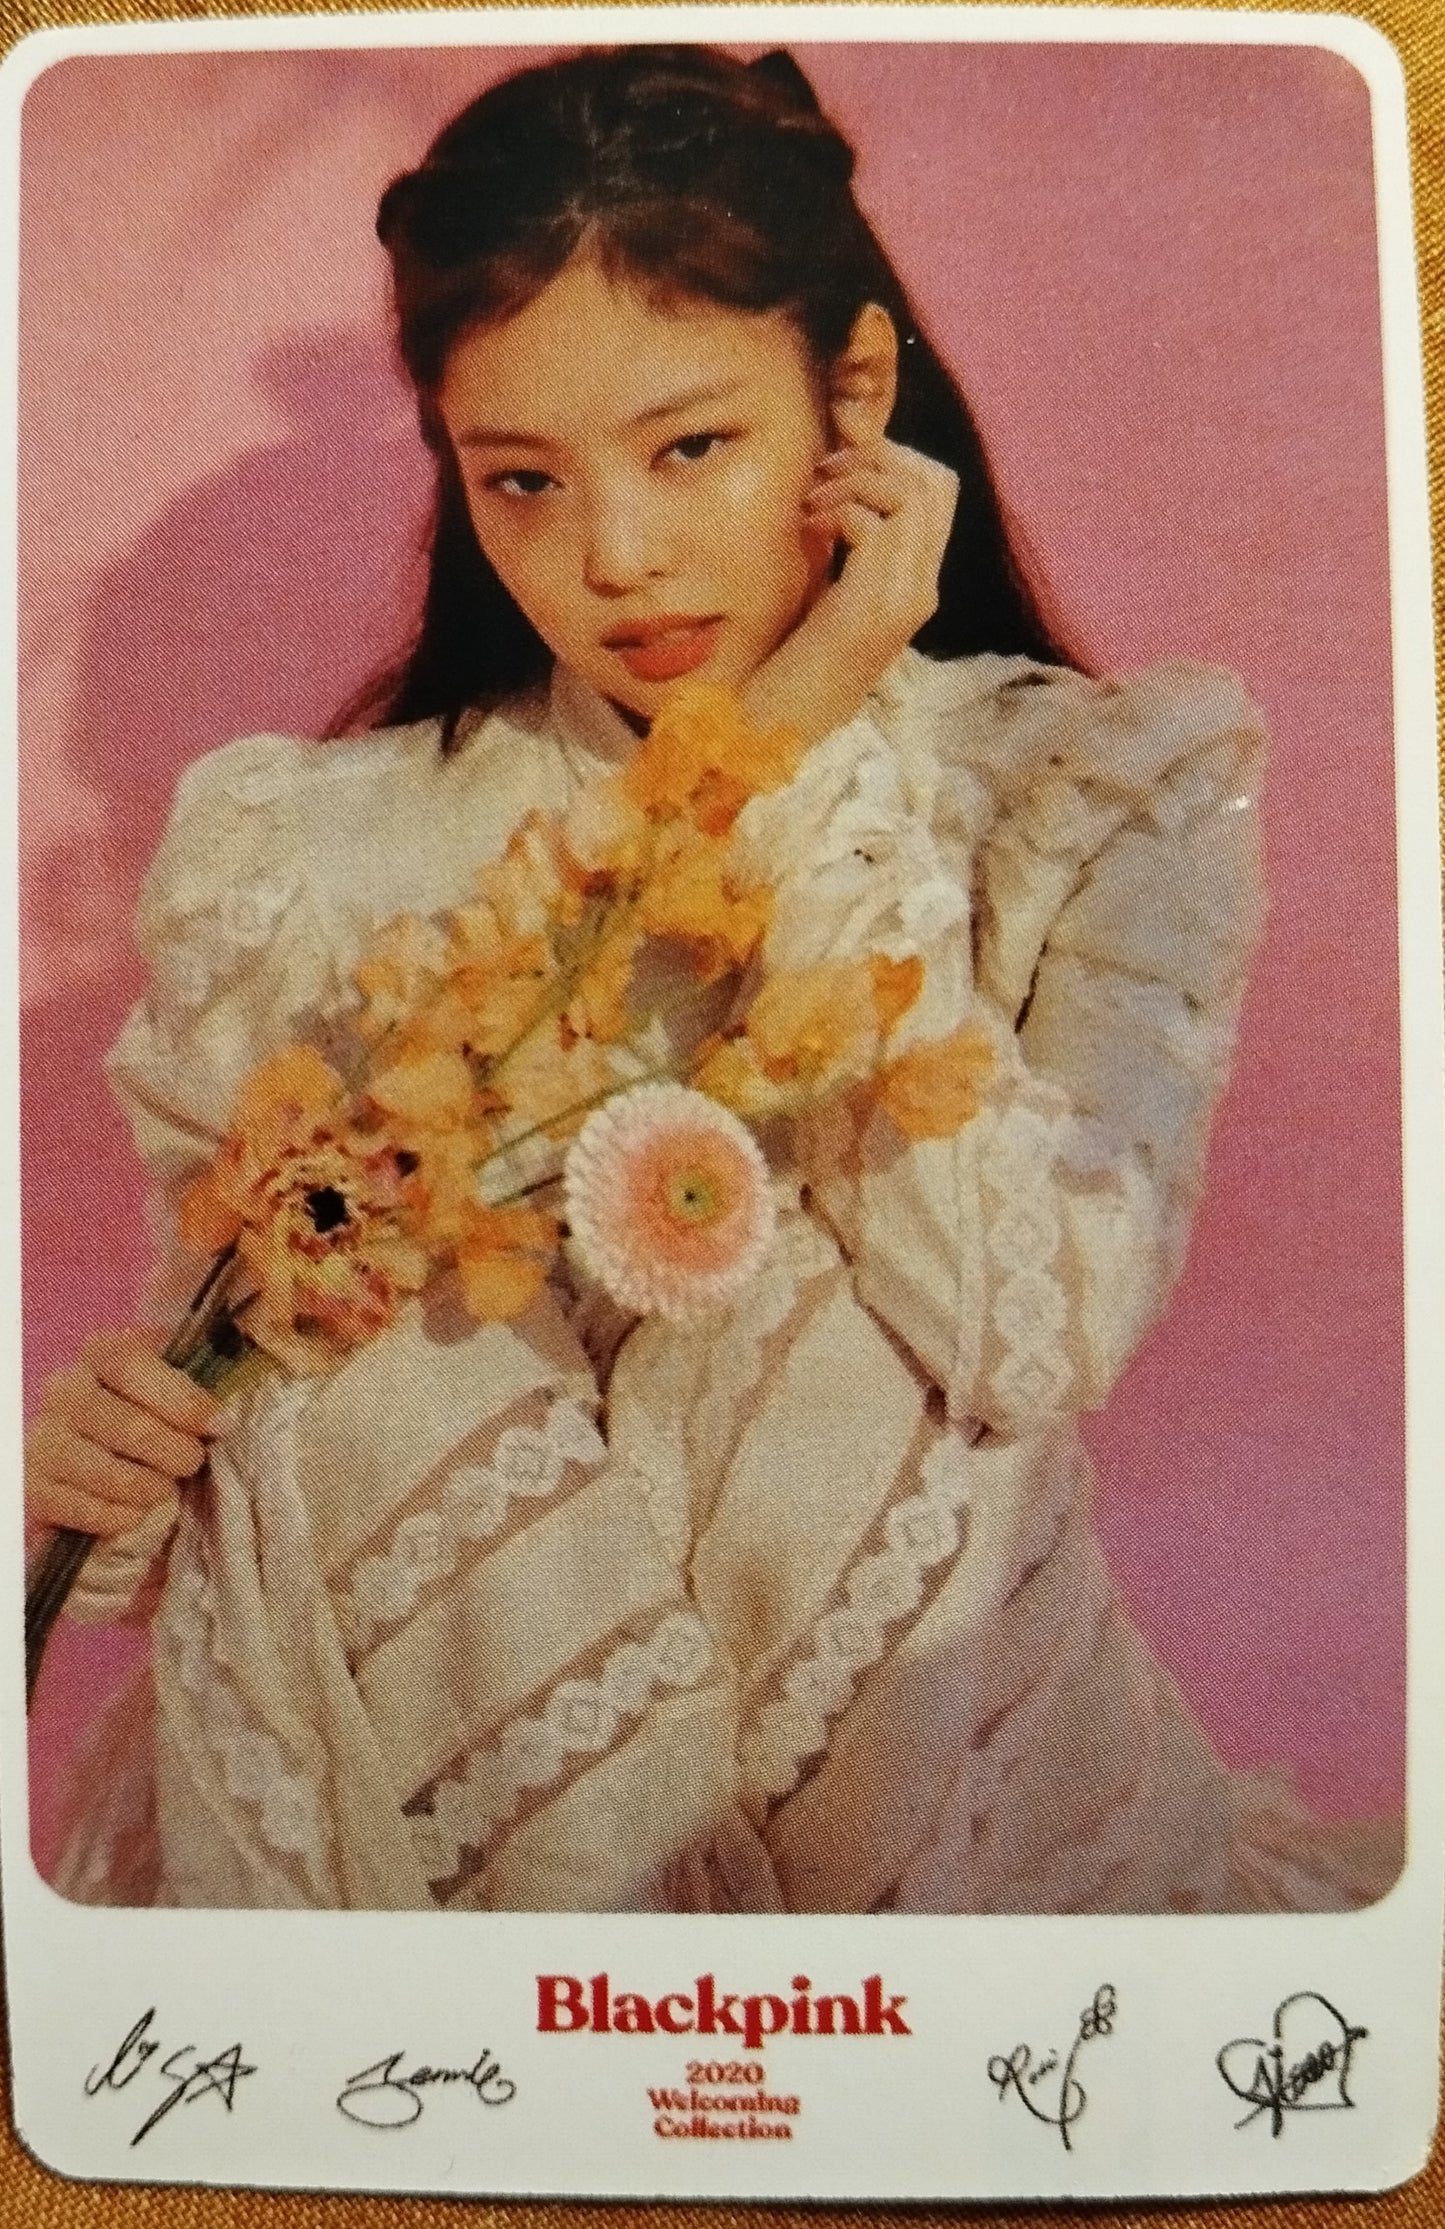 Photocard BLACKPINK 2020 welcoming collection Jennie